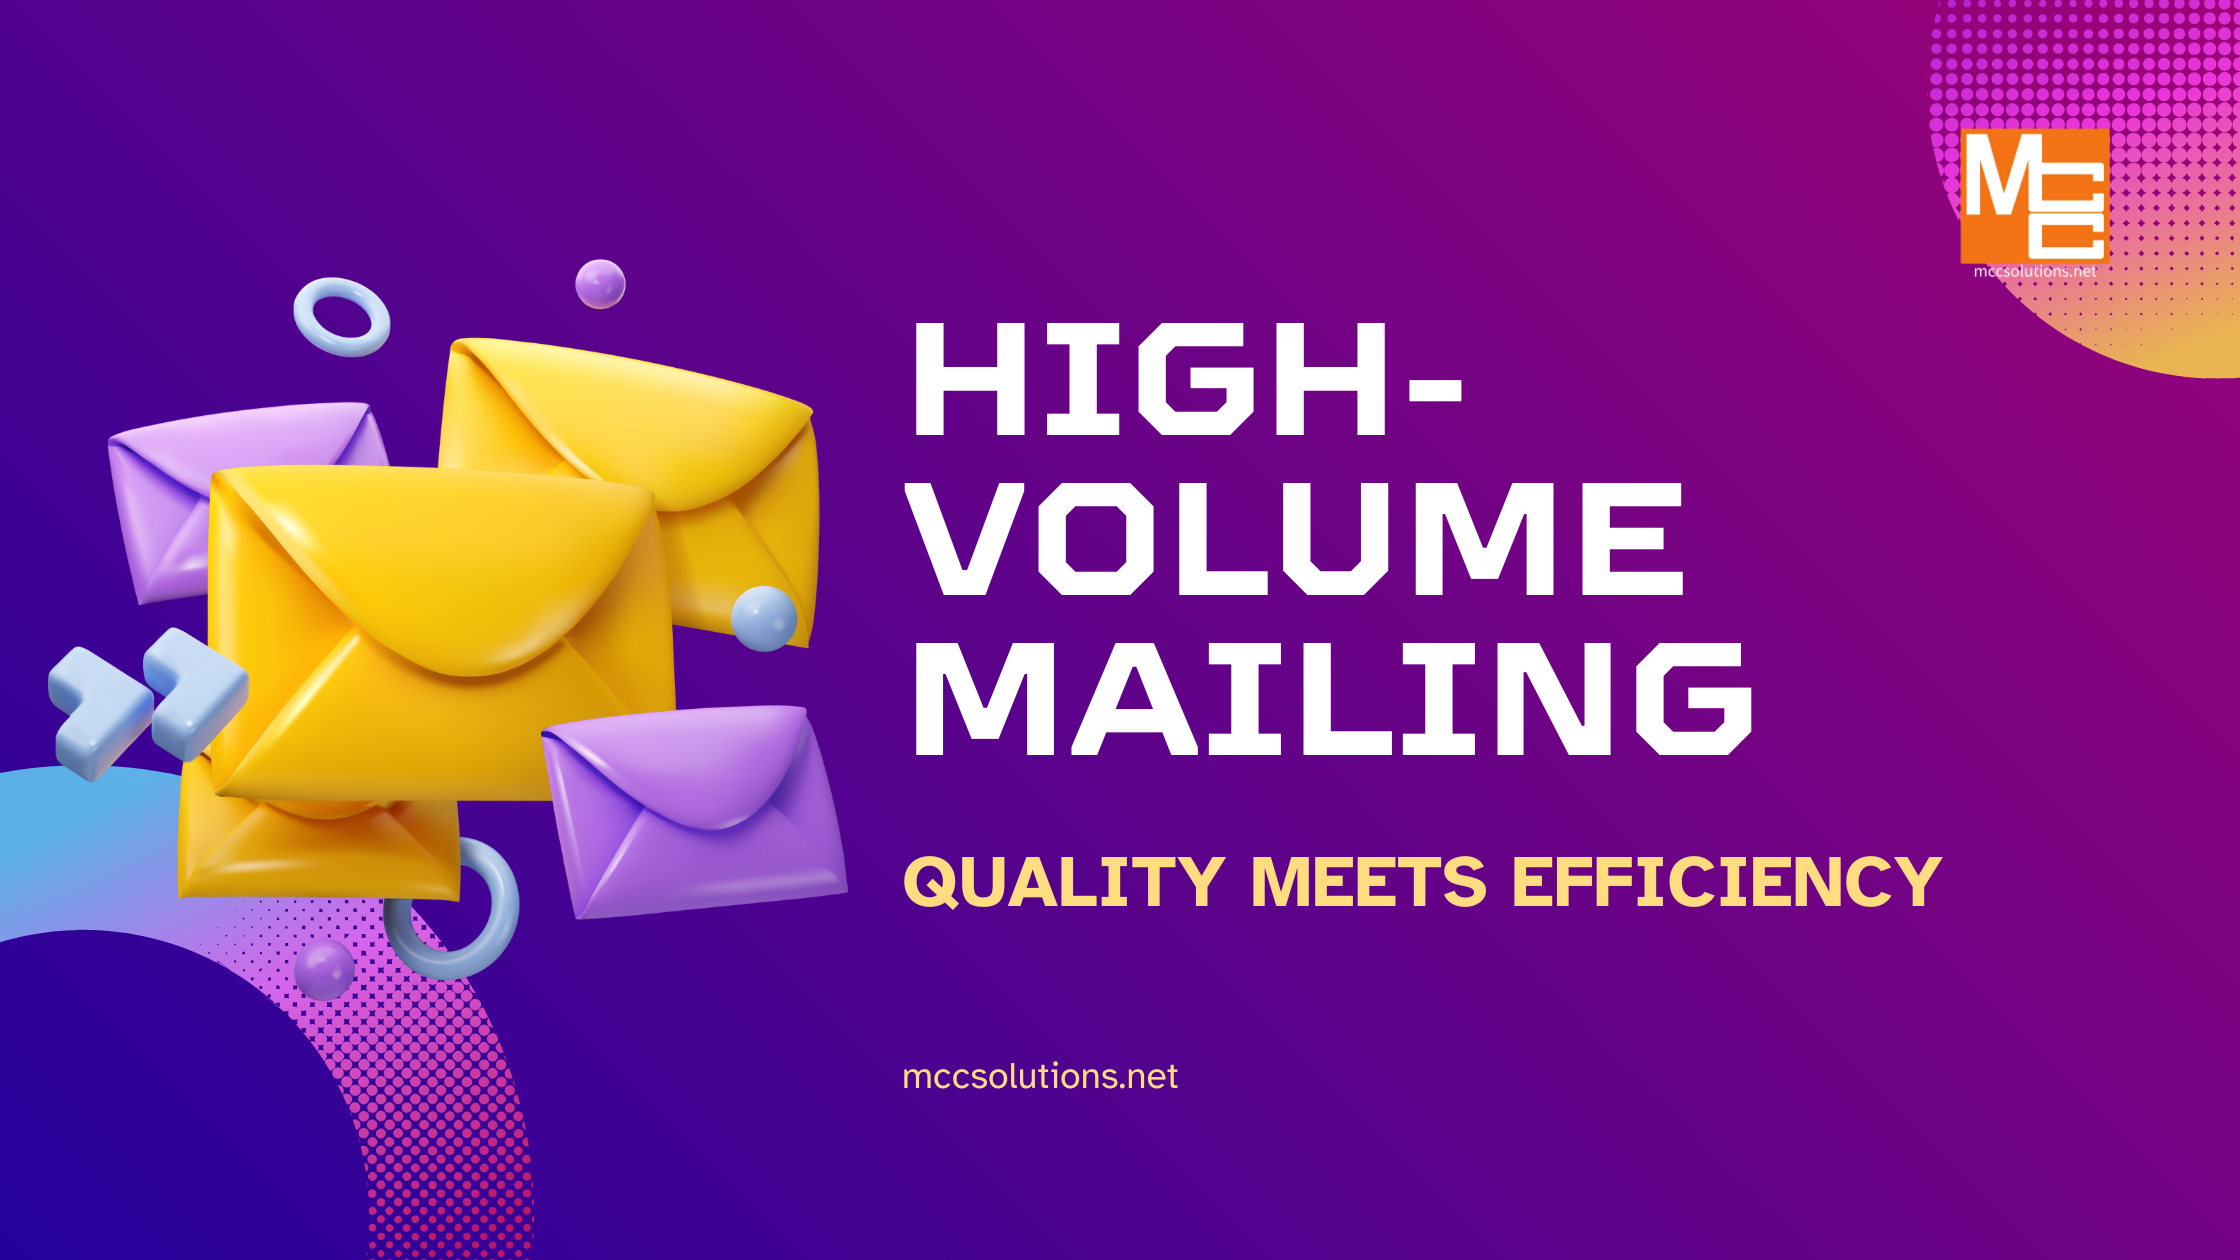 High-Volume Mailing: Quality Meets Efficiency